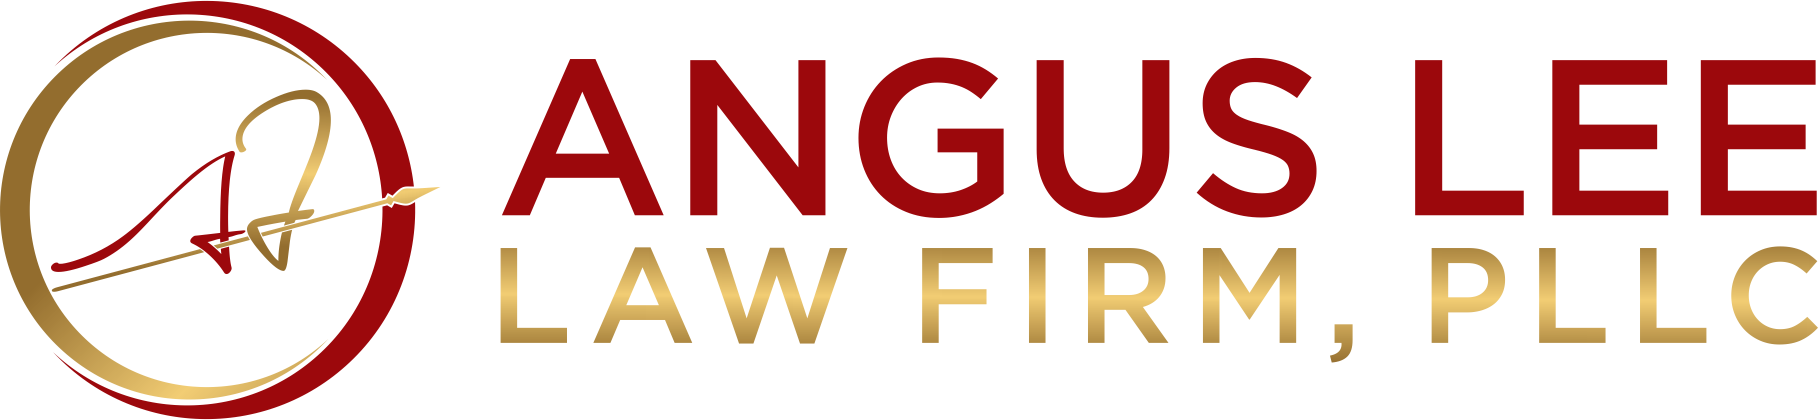 Angus Lee Law Firm